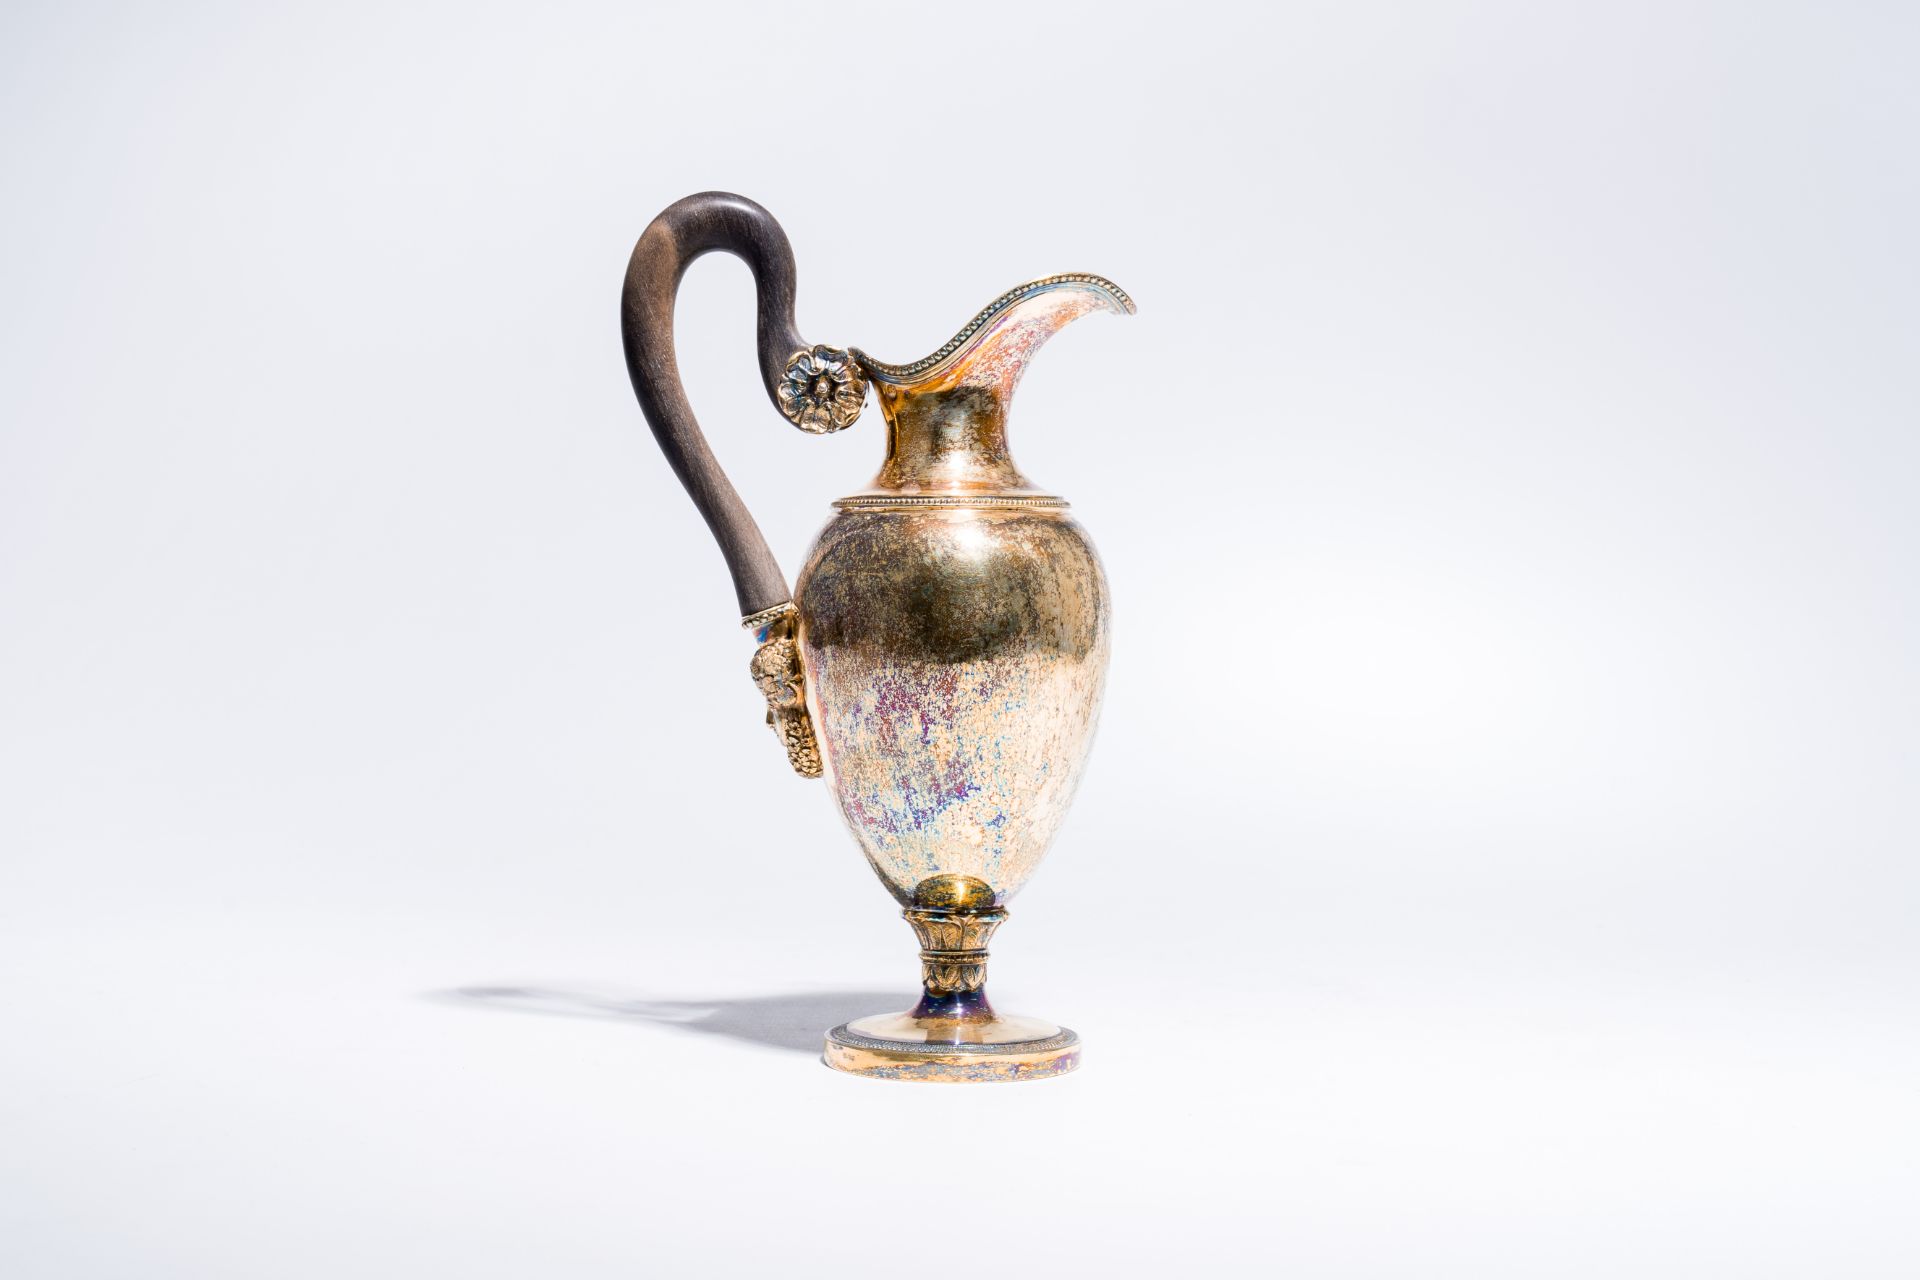 A Belgian gilt silver ewer with a mascaron and a wood handle, maker's mark K, first third 19th C. - Image 2 of 8